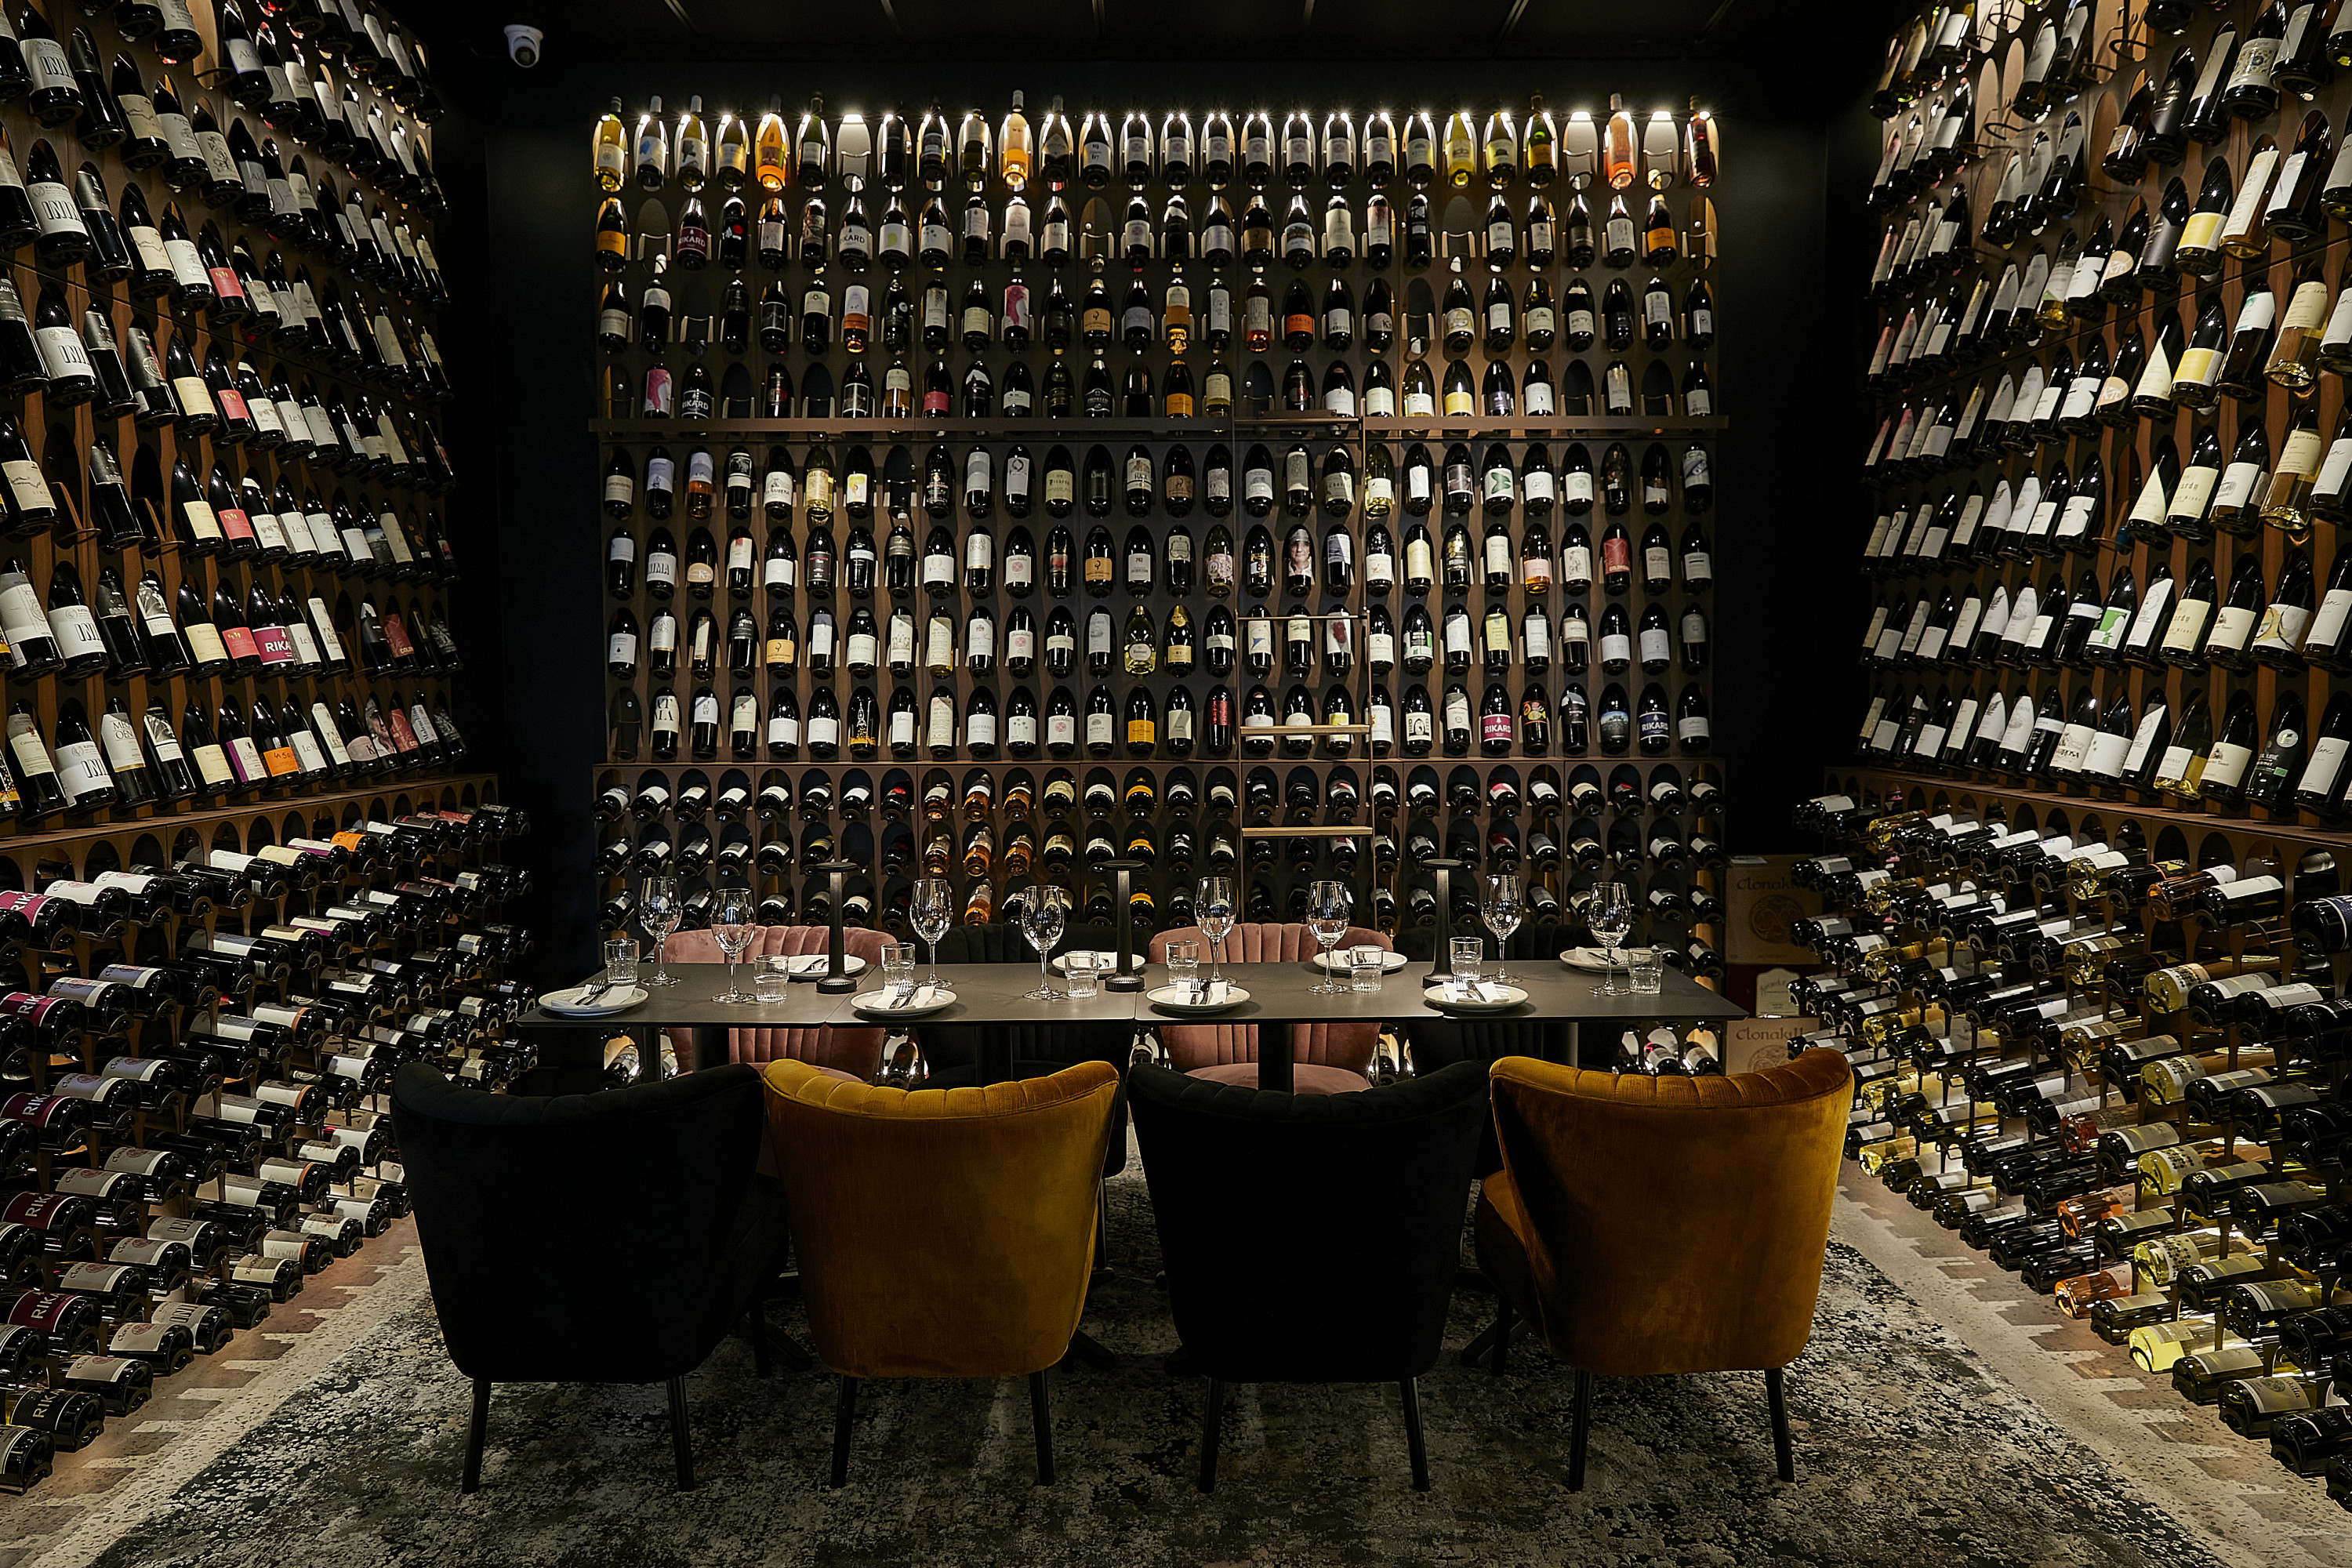 a wall stacked with wine bottles